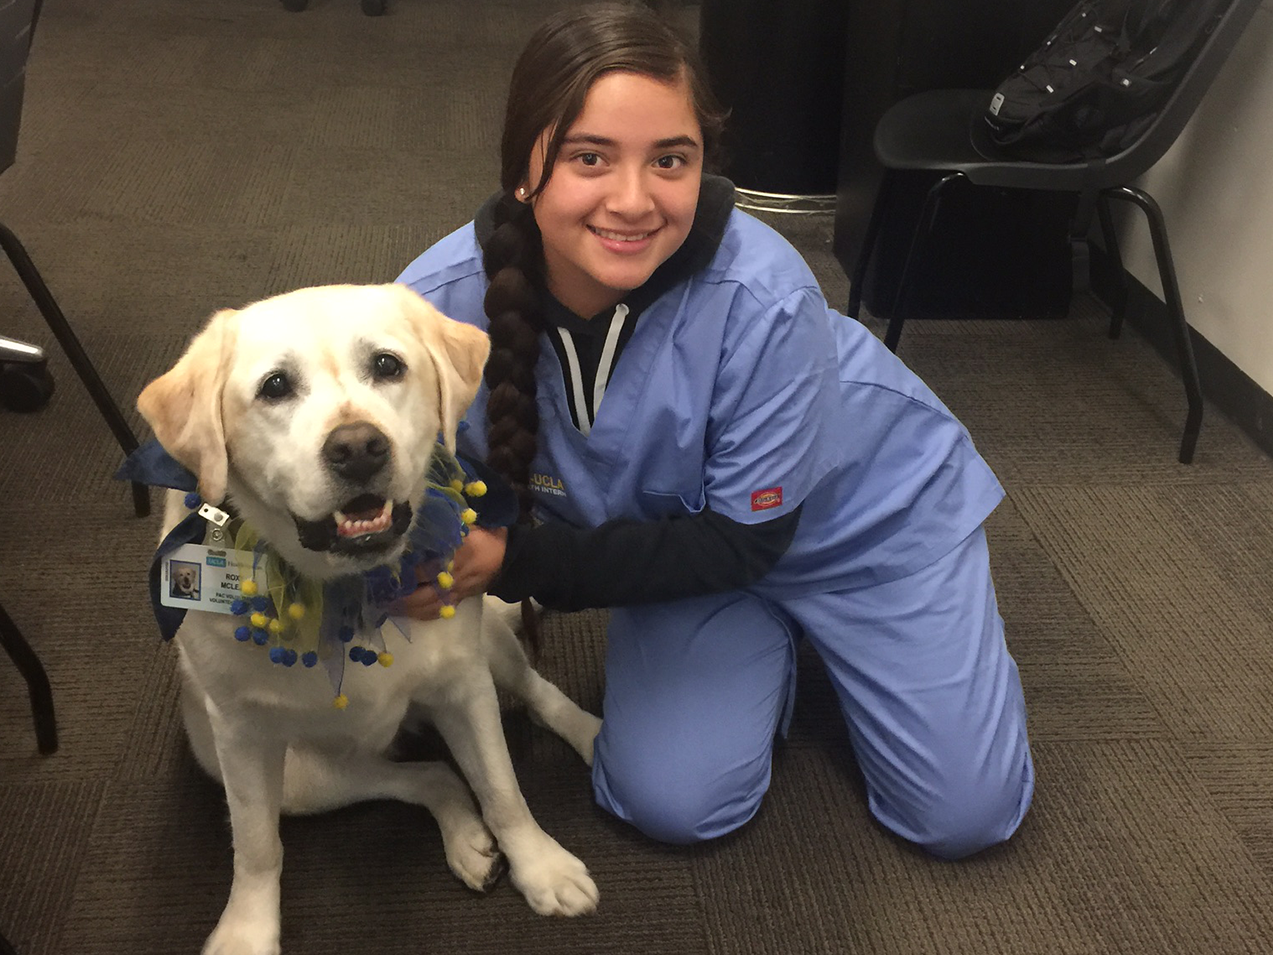 Student from Turner-UCLA Allied Health Internship pictured with a People Animal Connection visitor